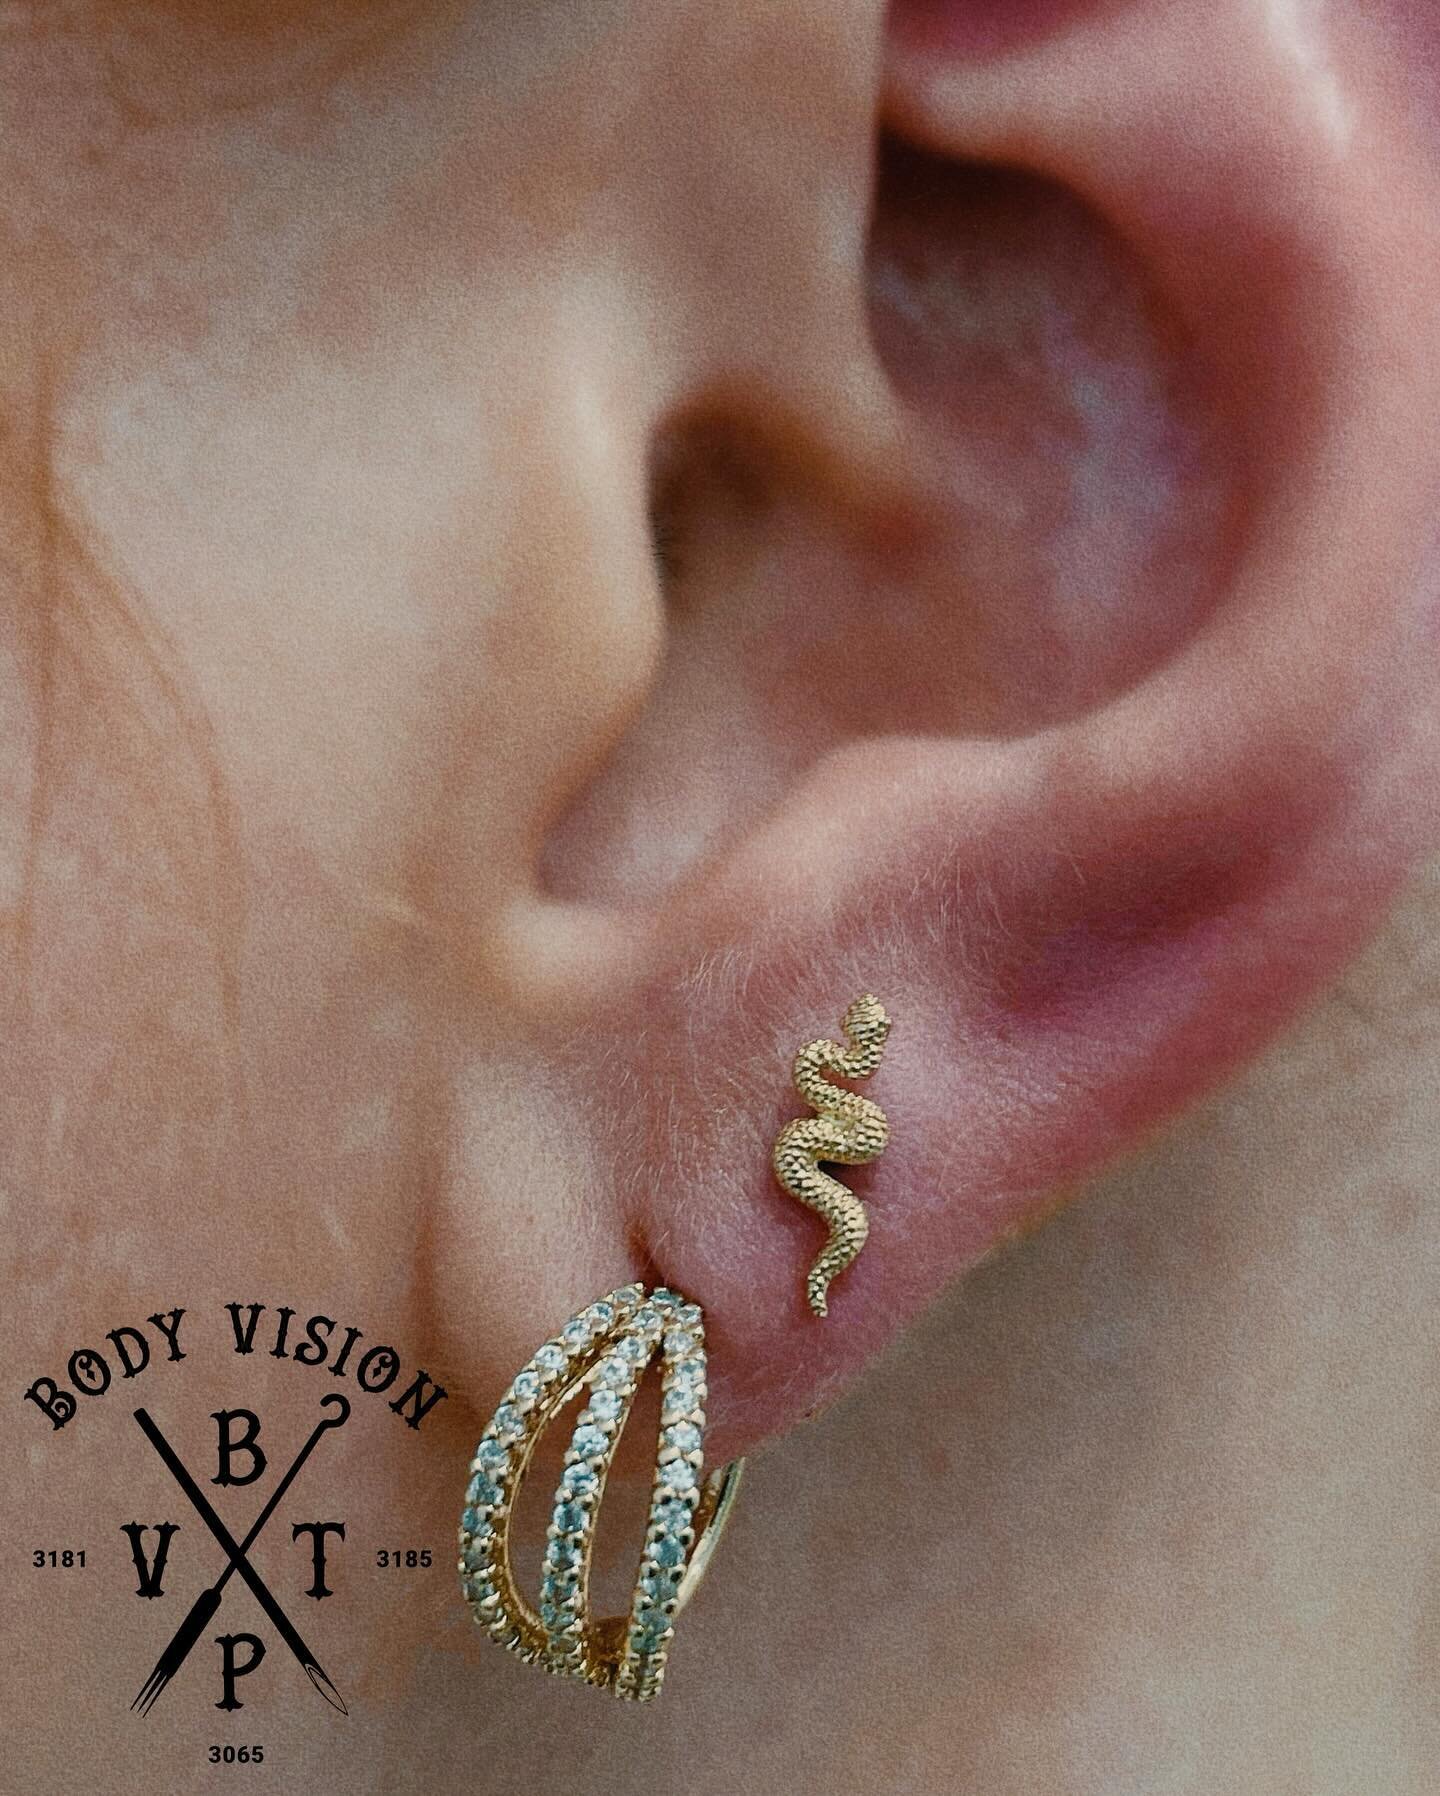 Mini Serpent- Welcome to the party! Serpent slithers into the party with elegance and edge all at once. Our new, textured snake elevates with movement &amp; flair in a variety of ear piercings as well as nose &amp; lip piercings. 

For all Bookings, 